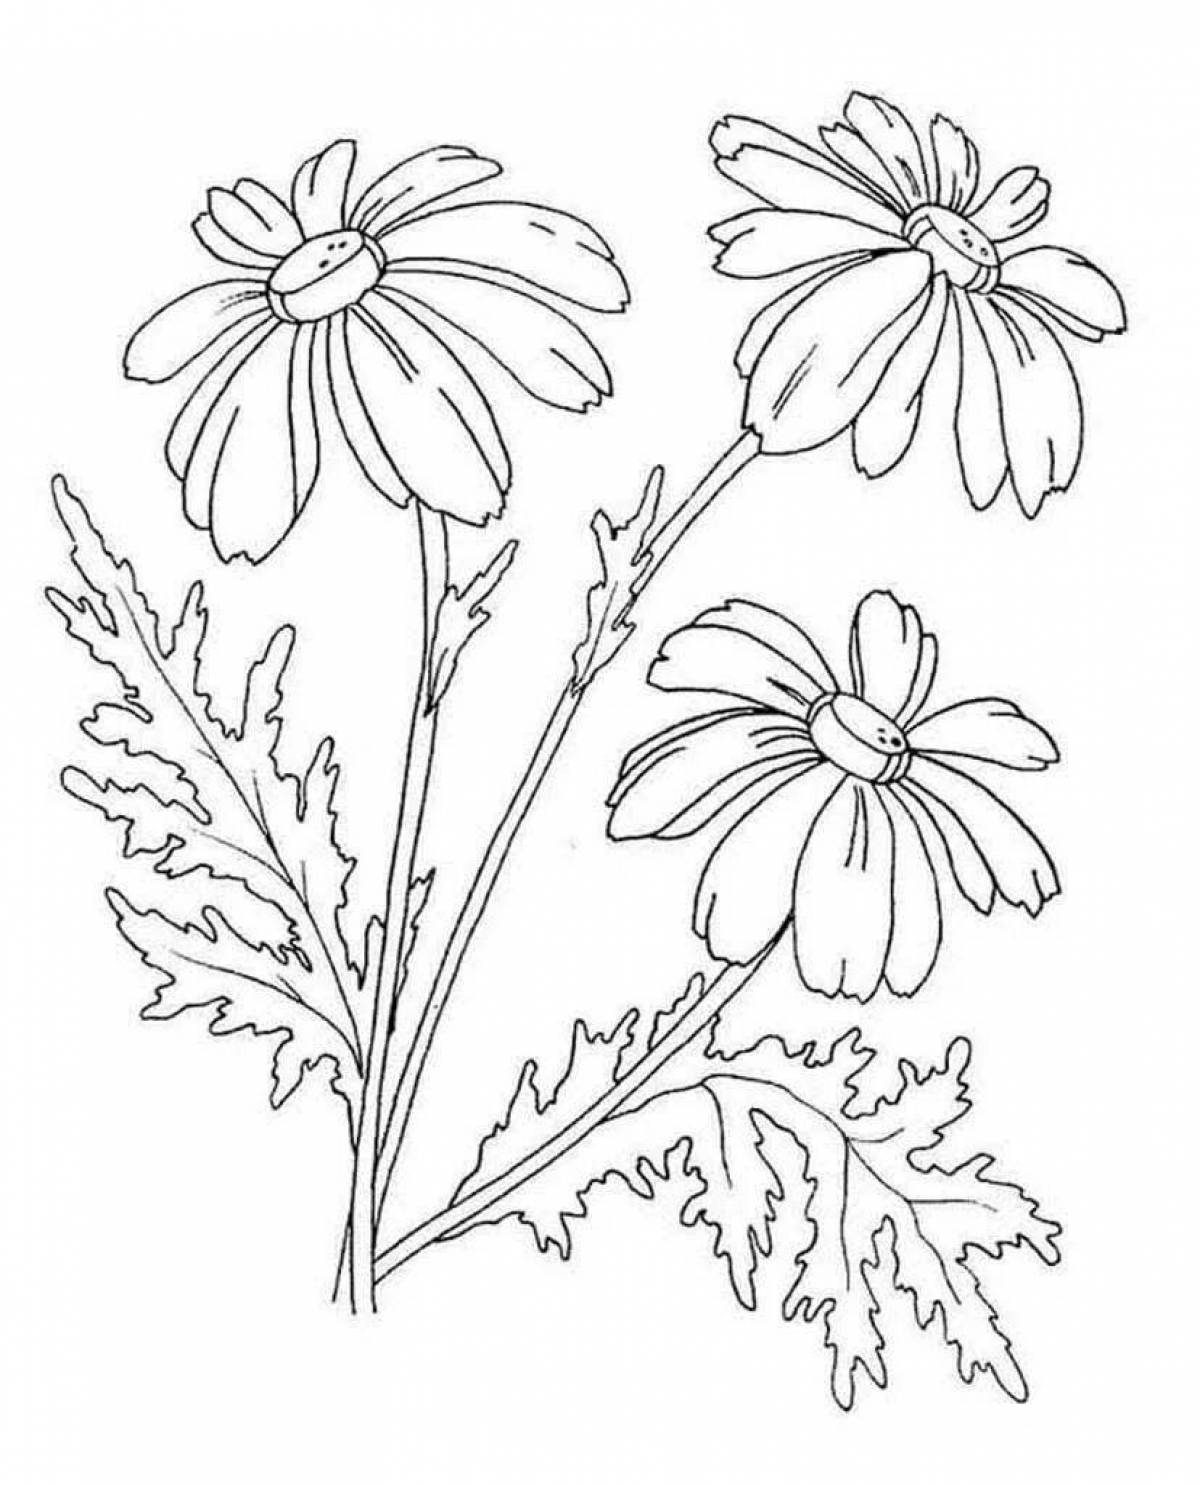 Adorable daisy coloring book for babies